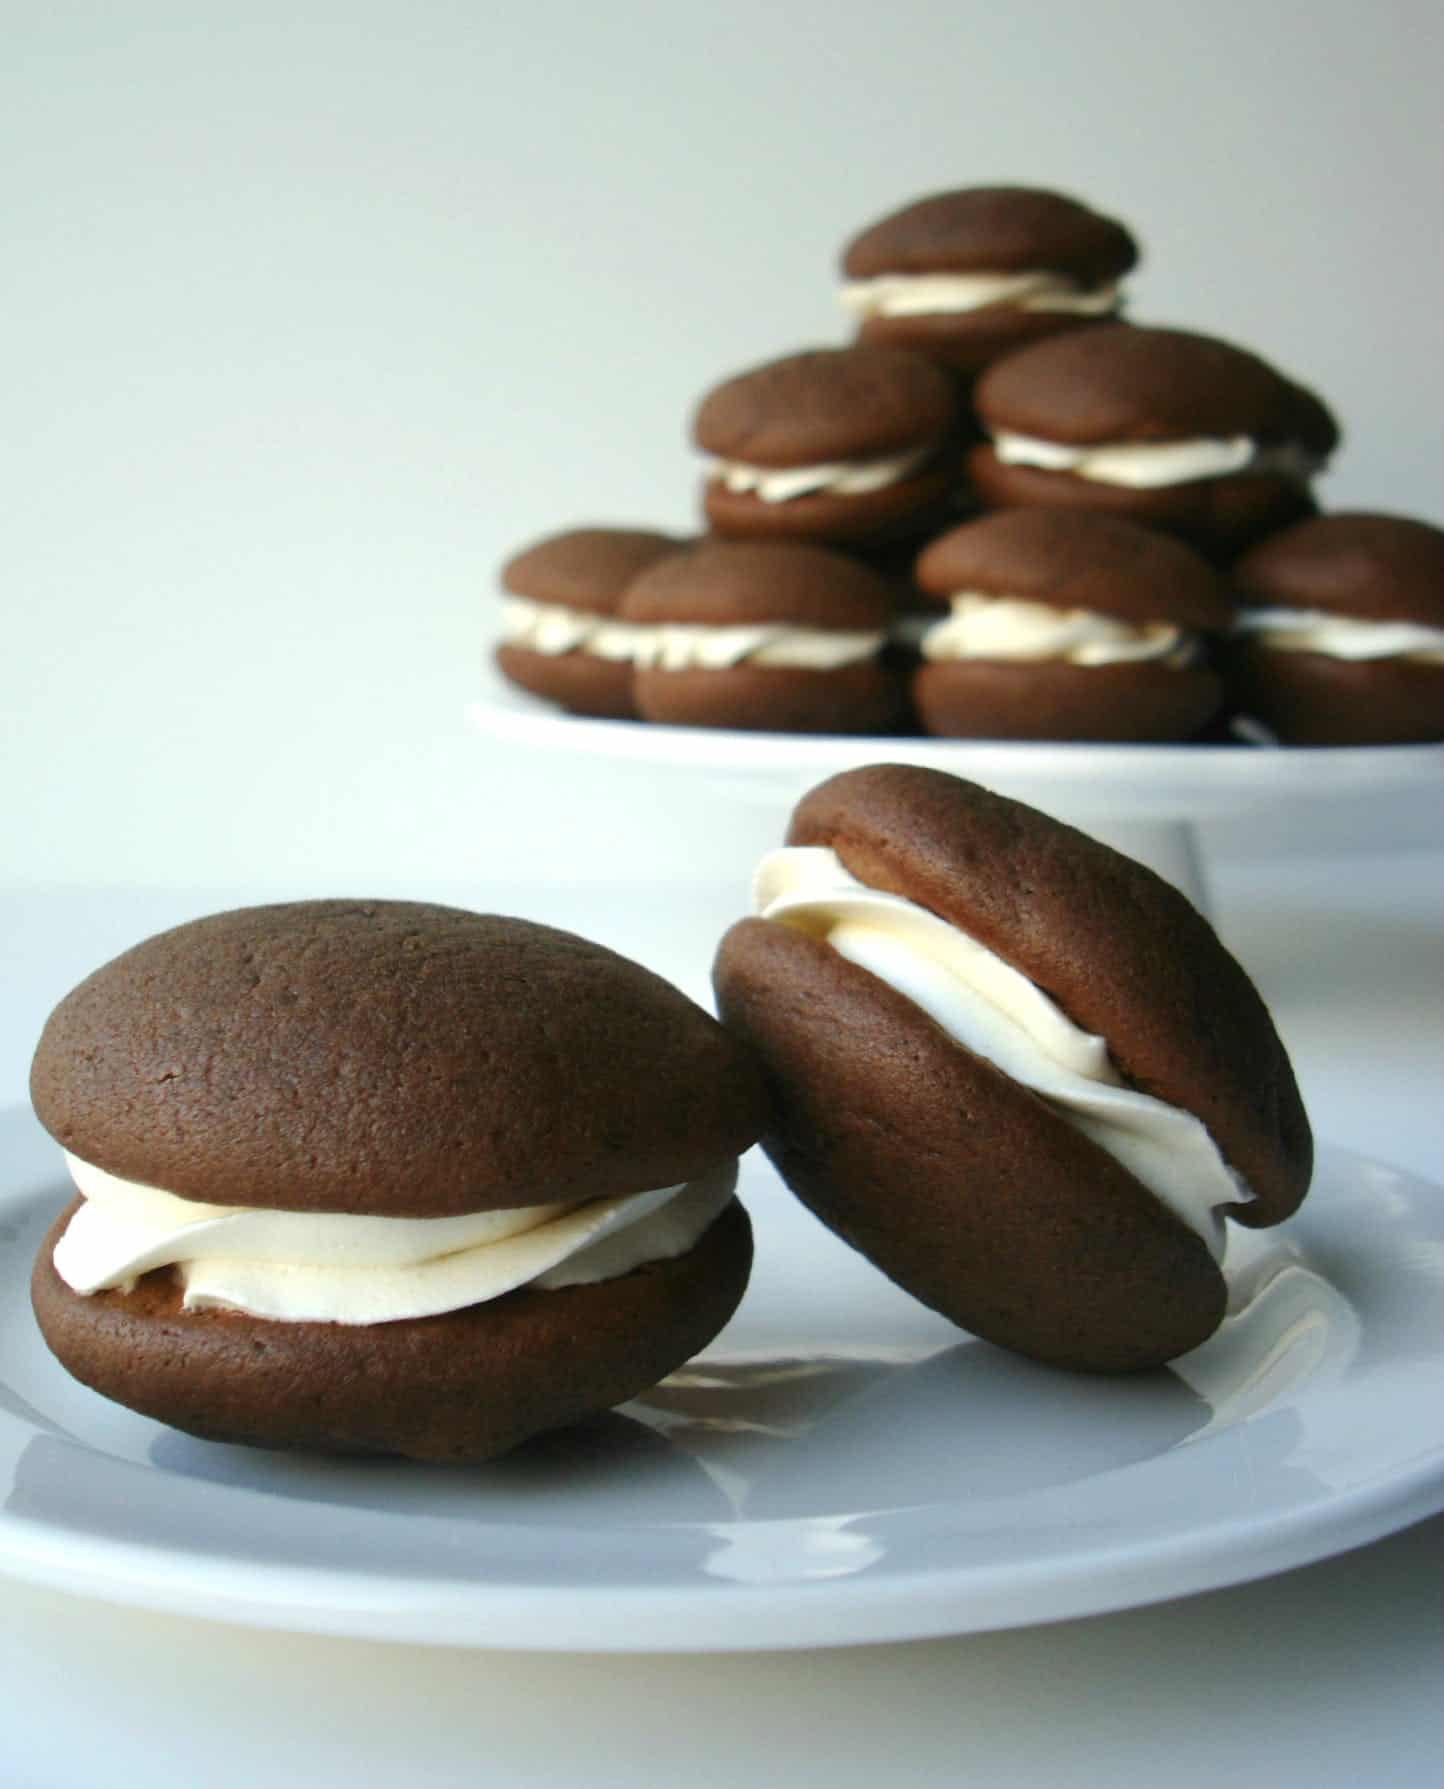 Full of Fun: Unique and Tasty Whoopie Pie Recipes to Try Out